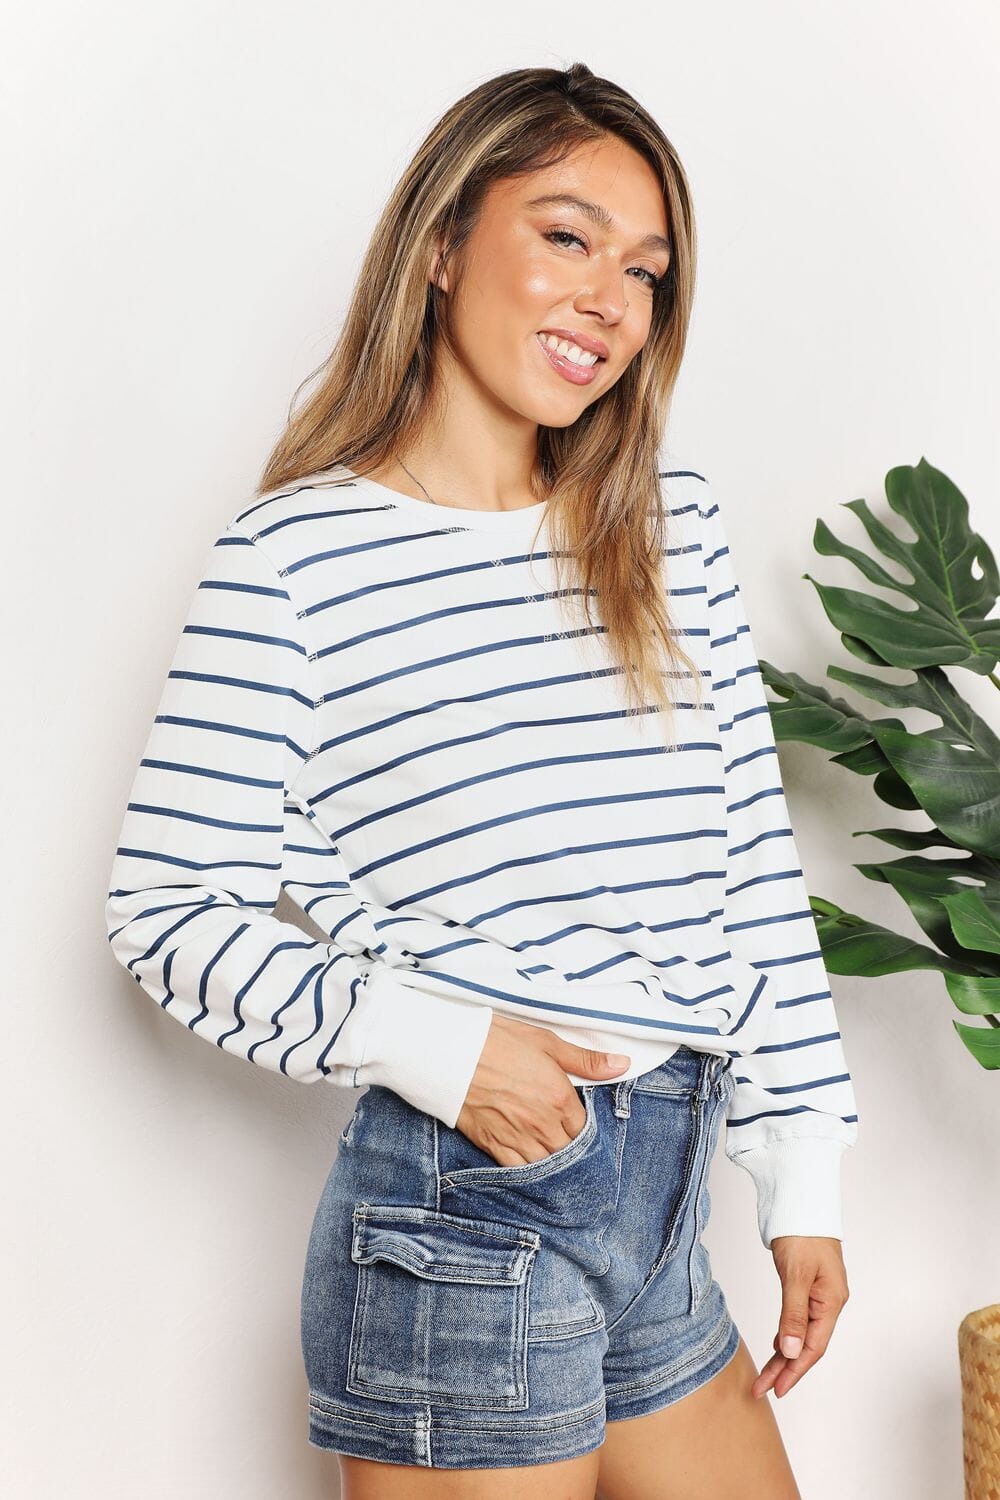 Double Take Striped Round Neck Long Sleeve Round Neck Top Shirts & Tops jehouze 